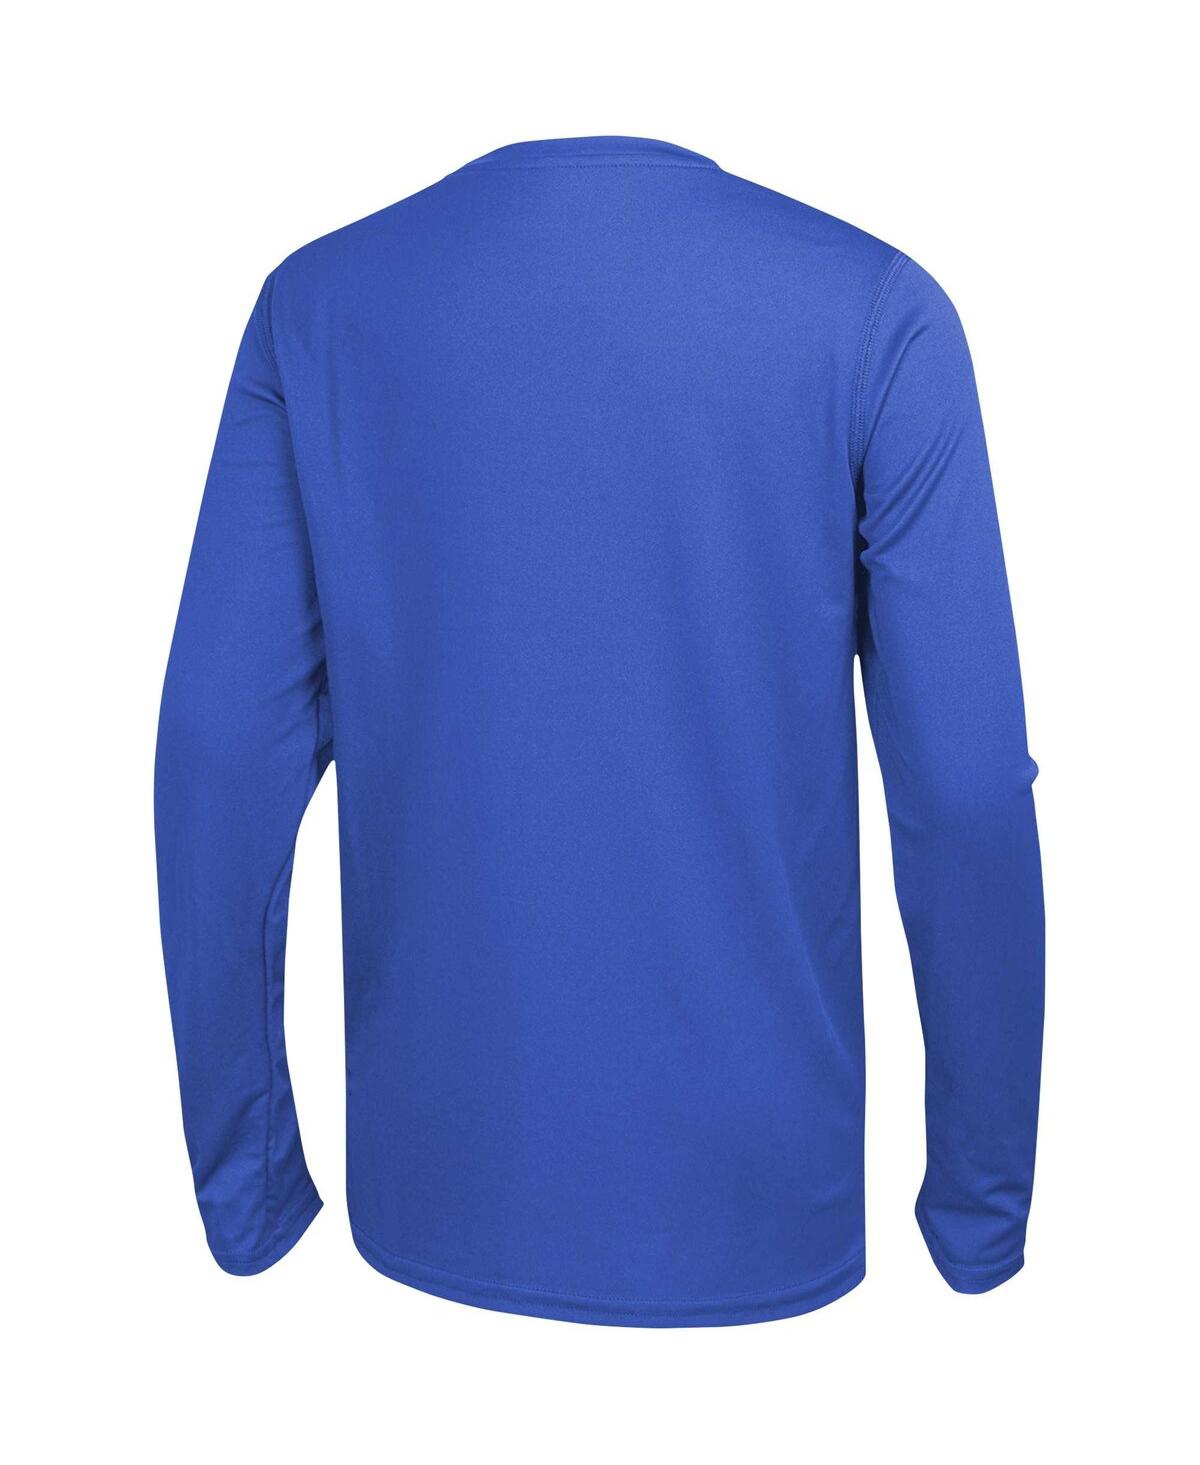 Shop Outerstuff Men's Royal Los Angeles Rams Side Drill Long Sleeve T-shirt